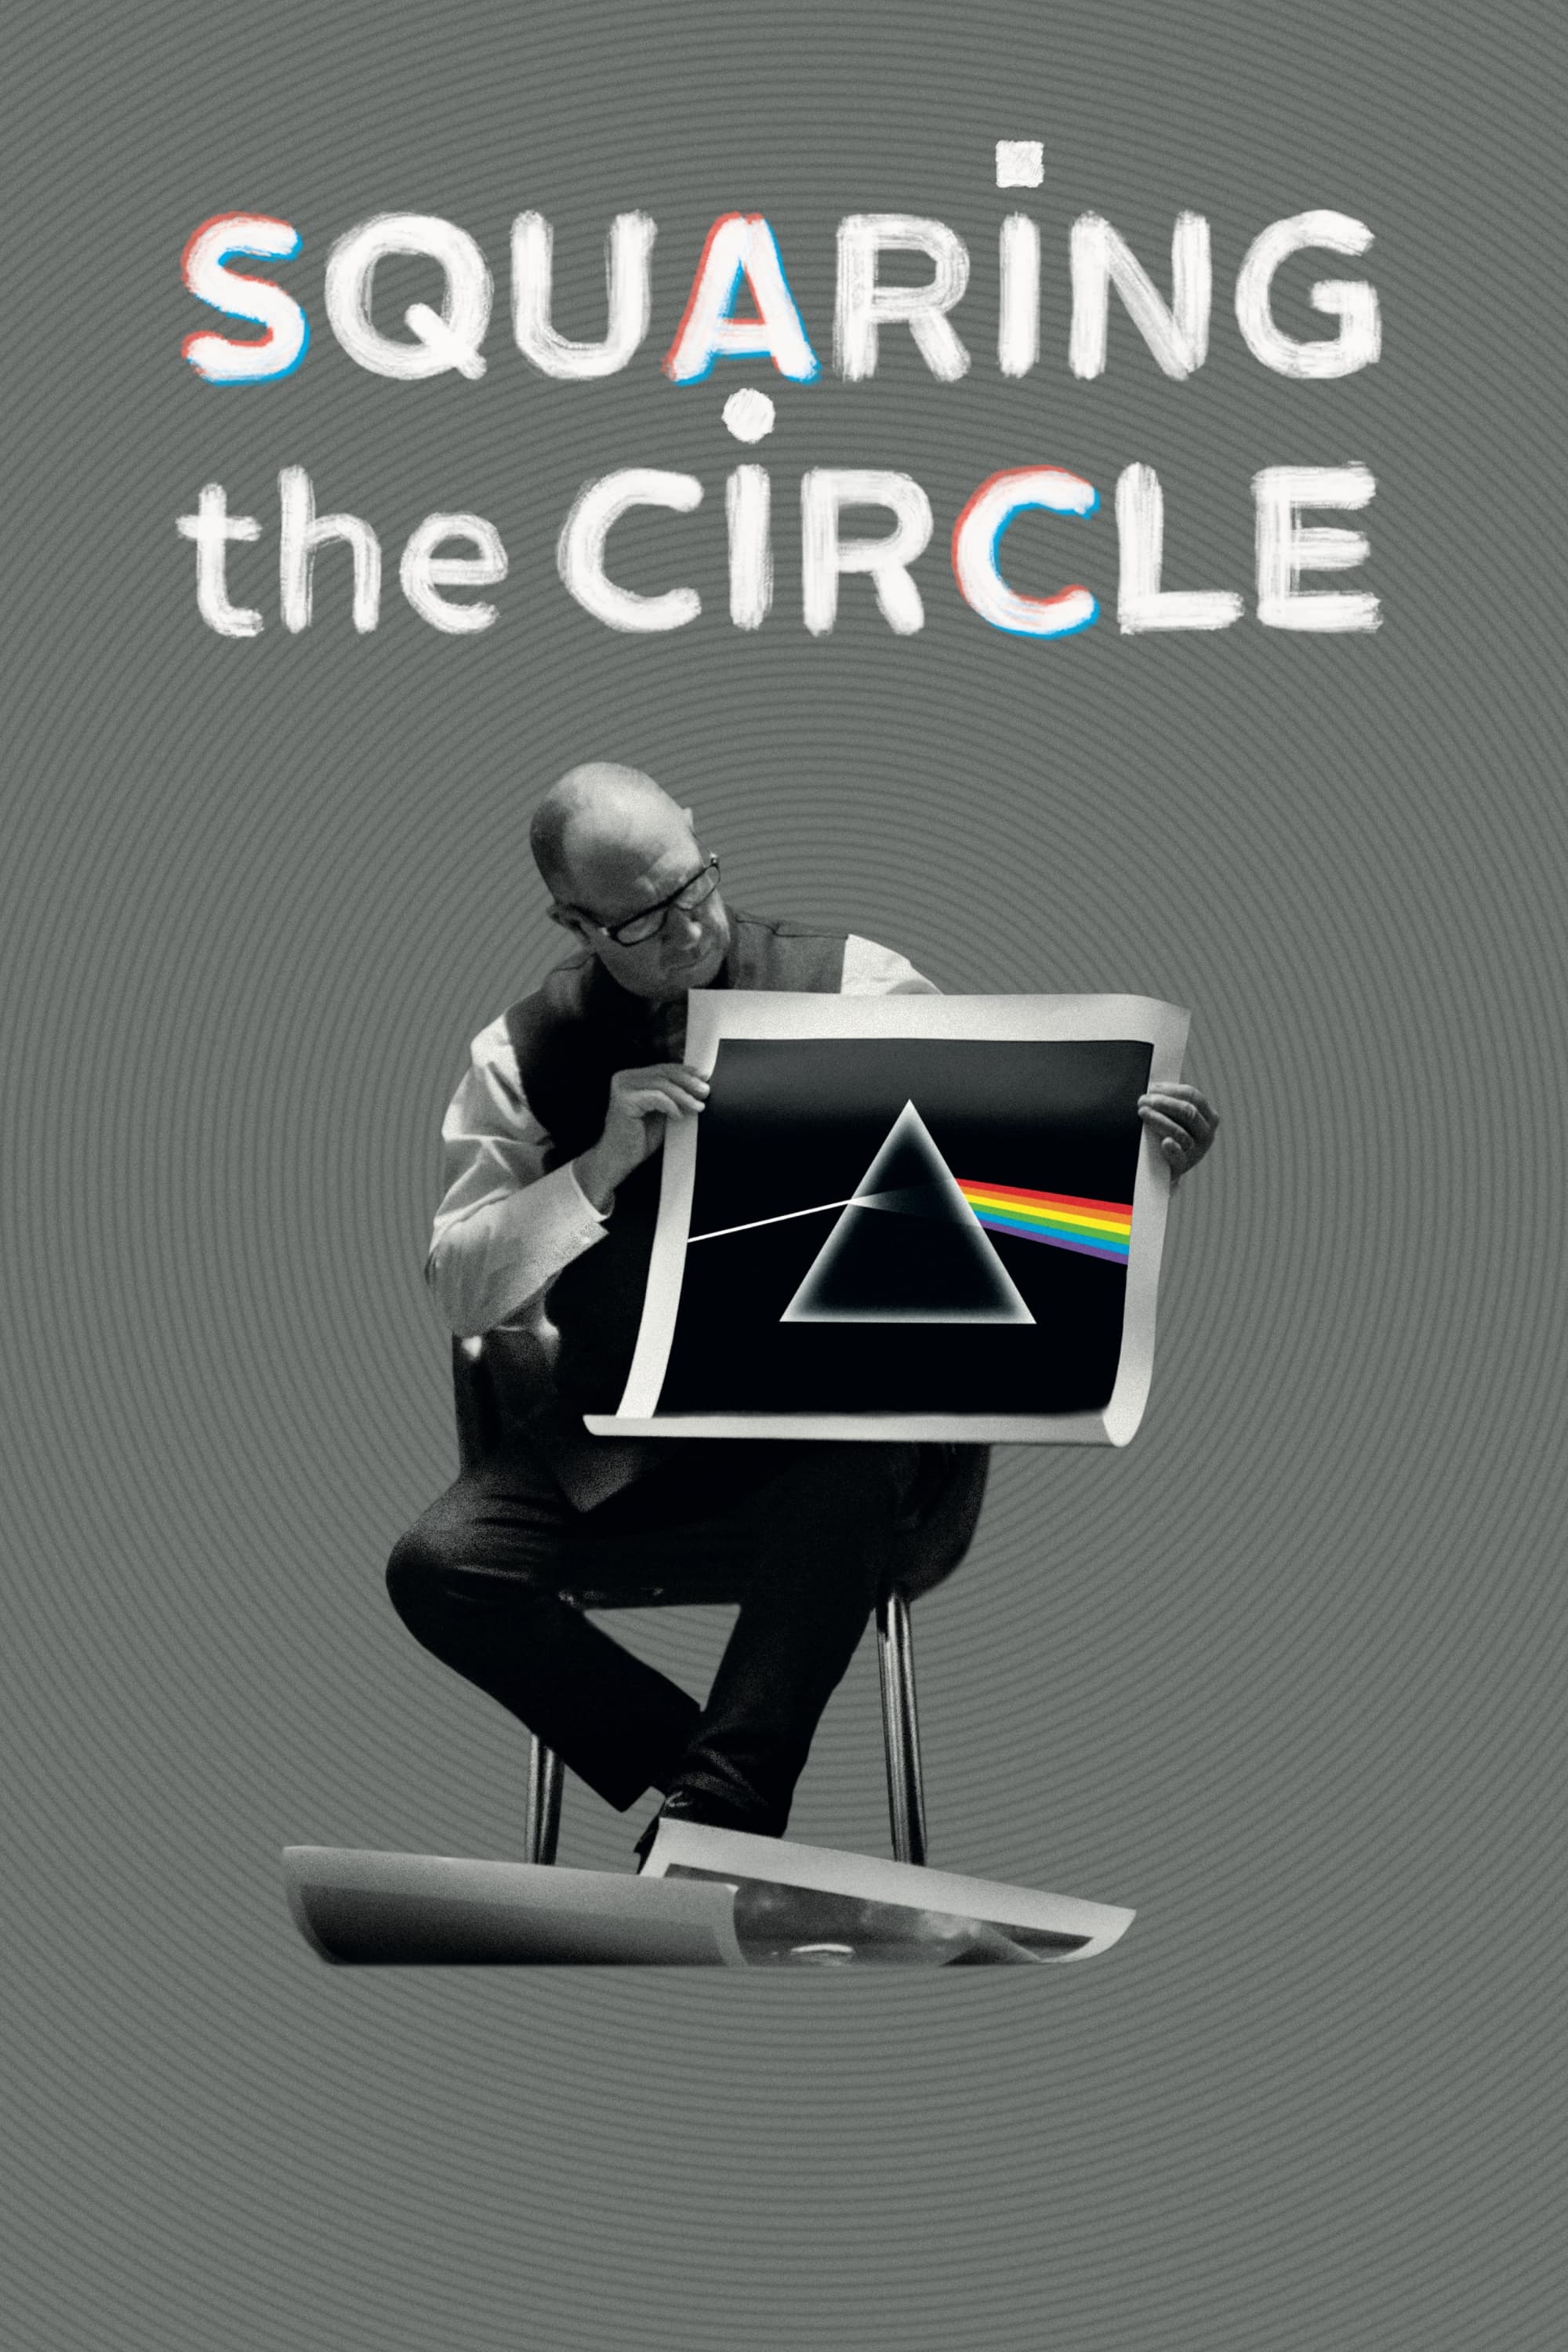 Squaring the Circle (The Story of Hipgnosis) Free Online Movie